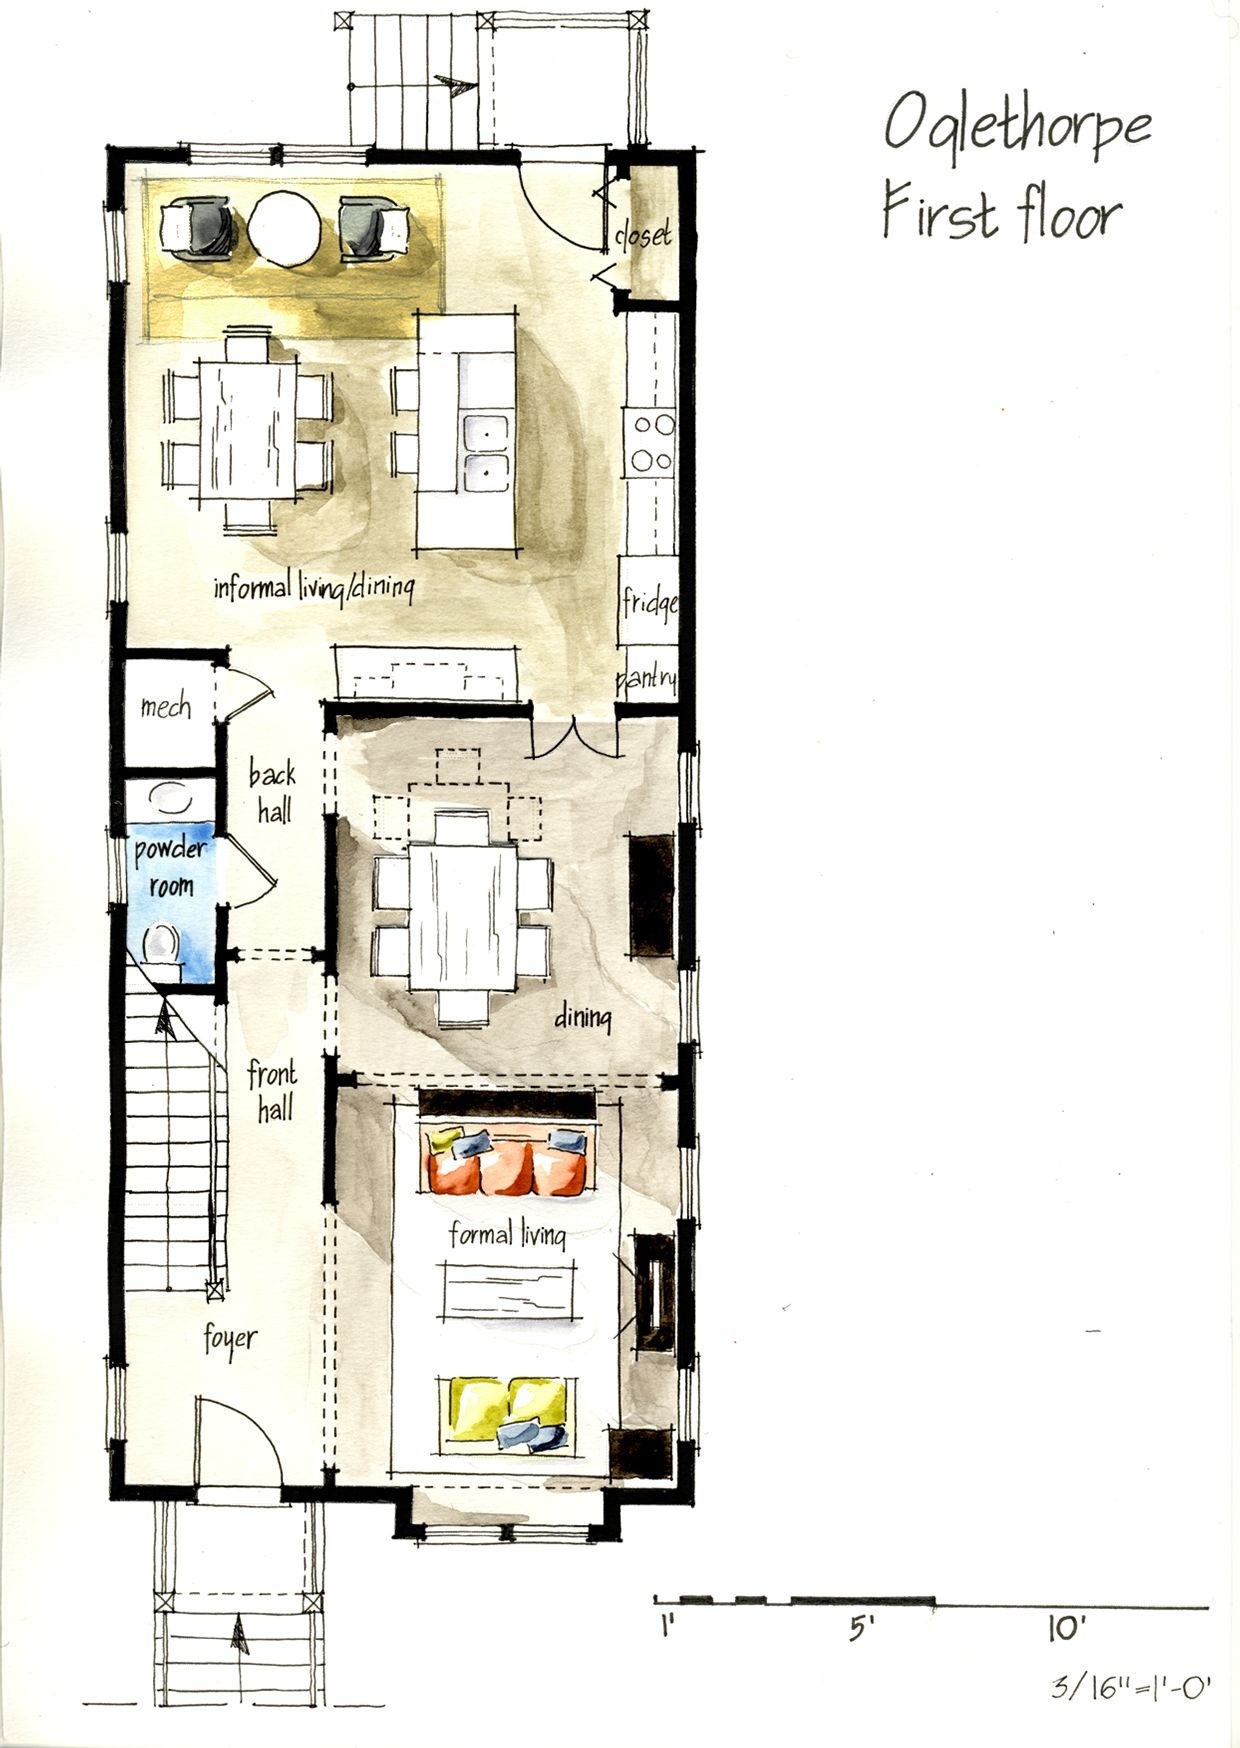 Splendid hand drawing plans | floor plans, floor plan sketch, plan sketch with gorgeous how to draw a floor plan by hand